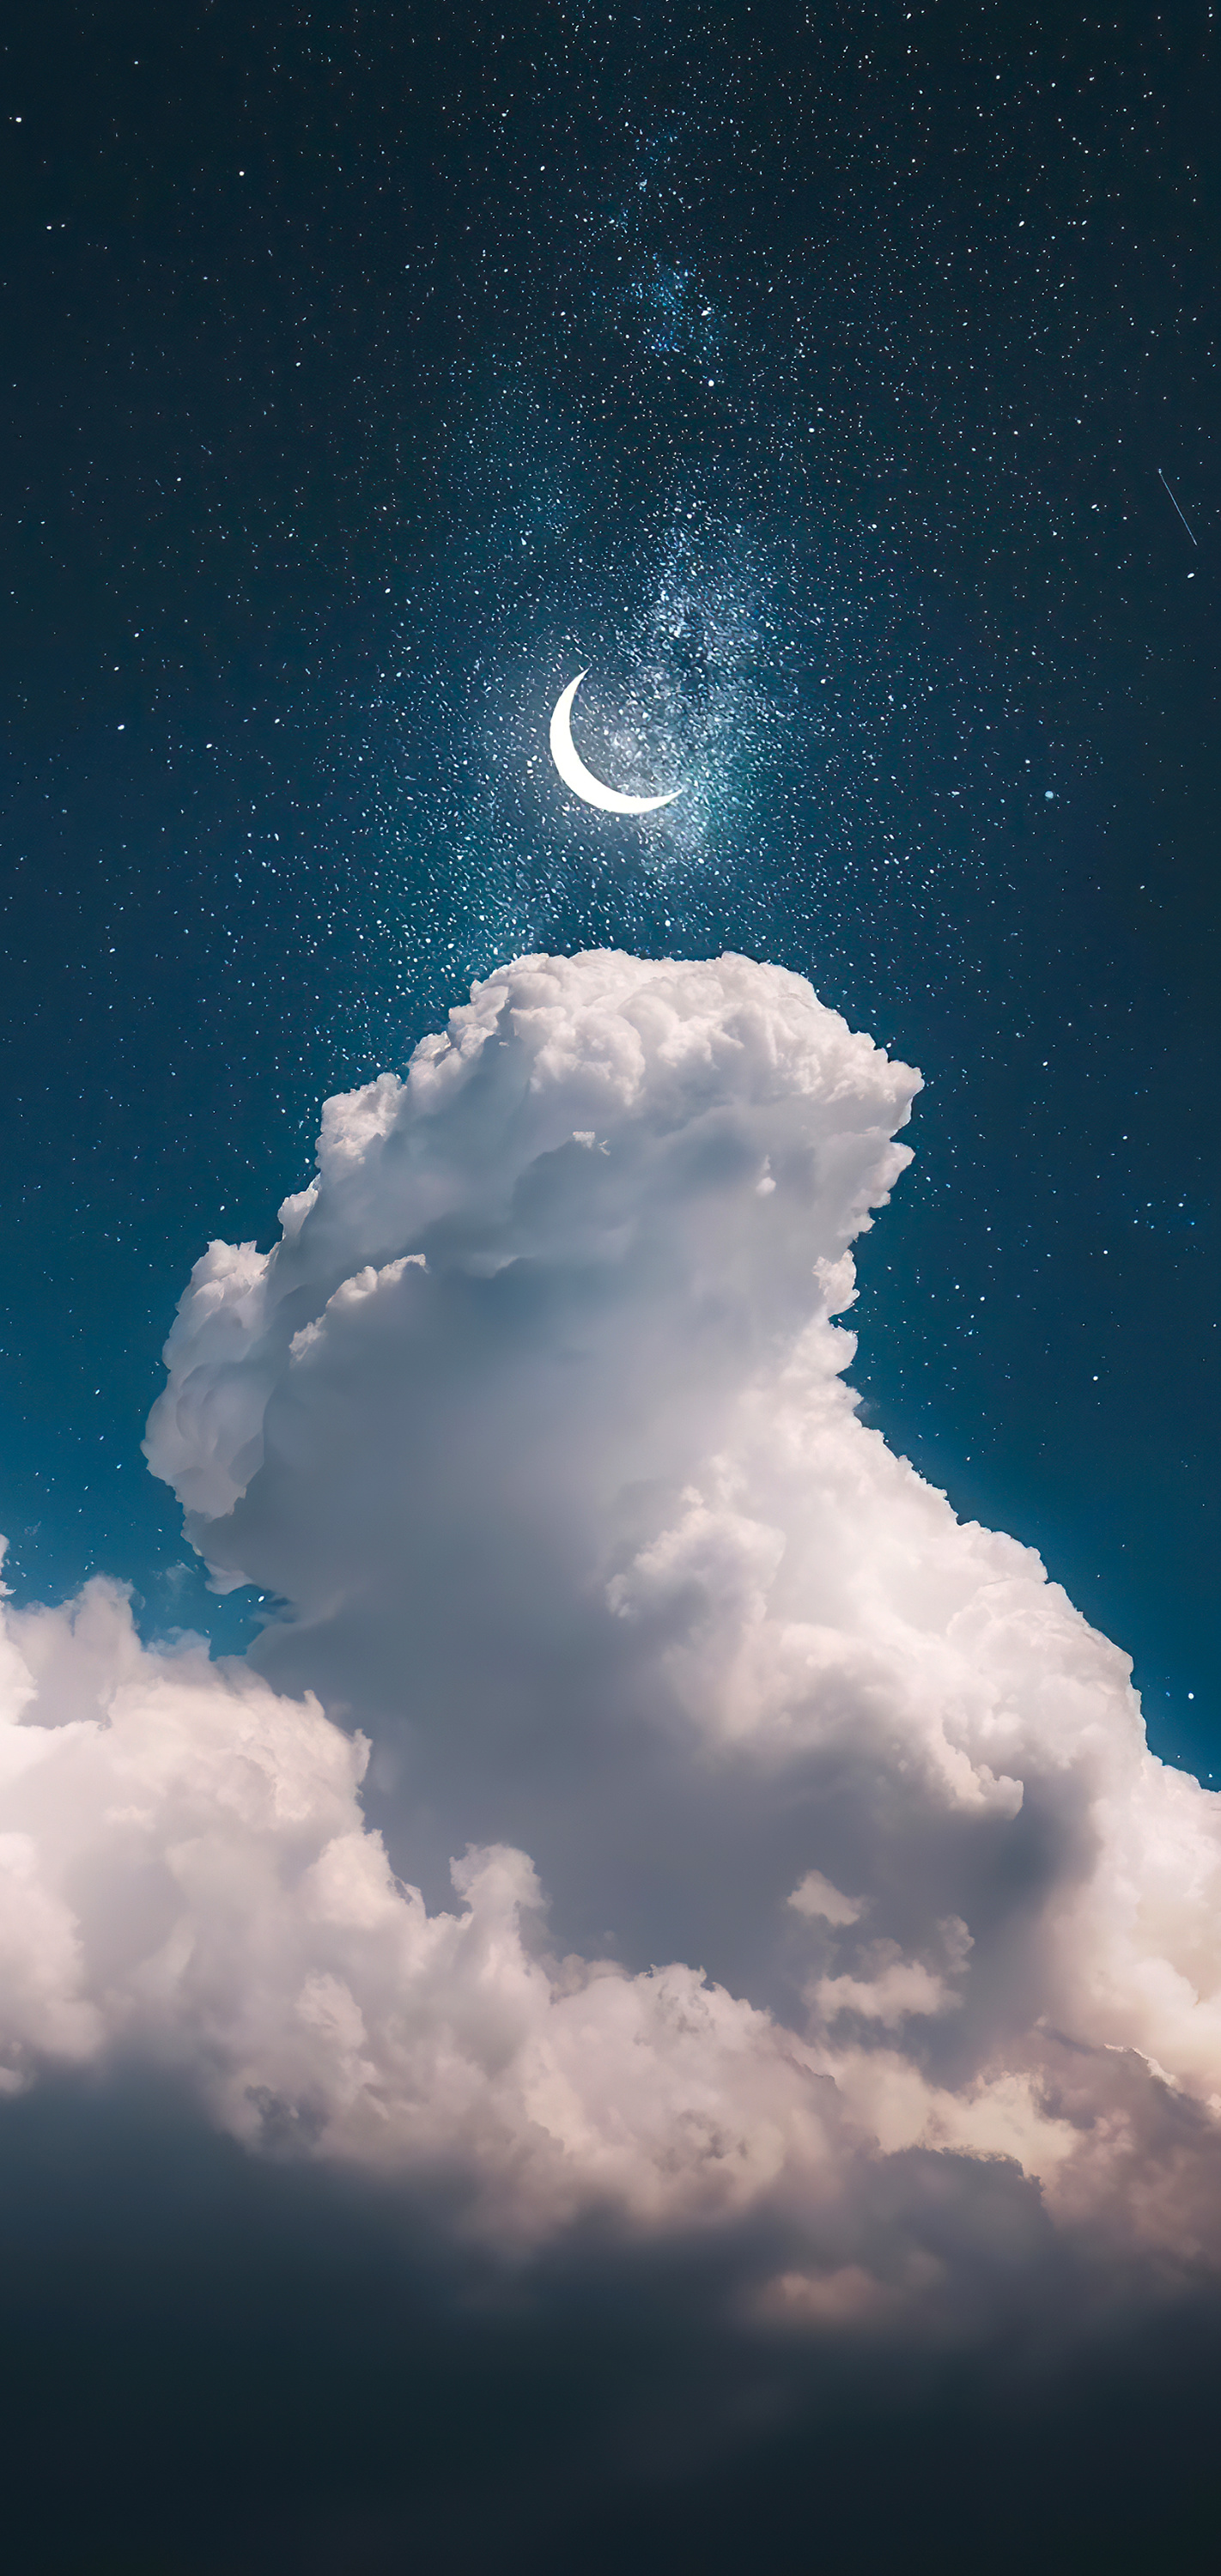 Cloudy sky with crescent moon